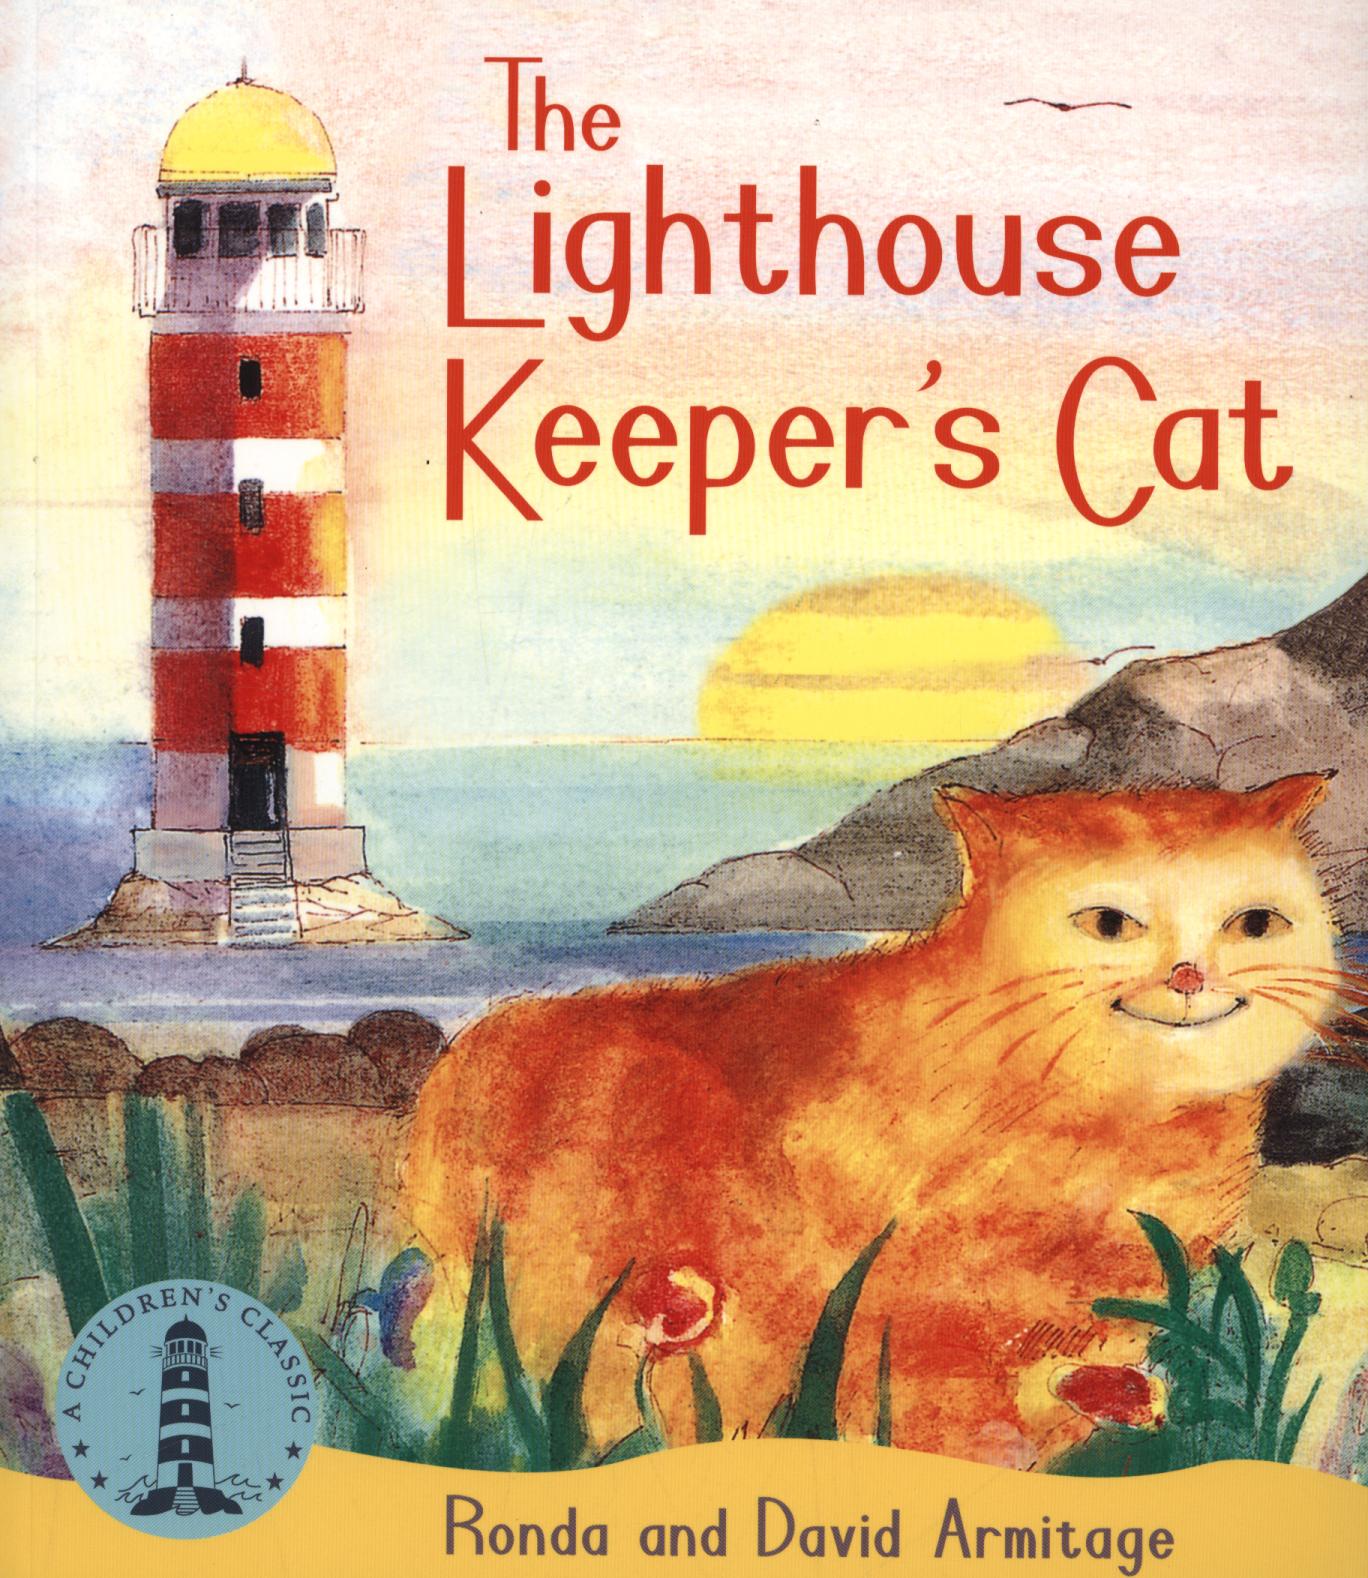 Lighthouse Keeper's Cat